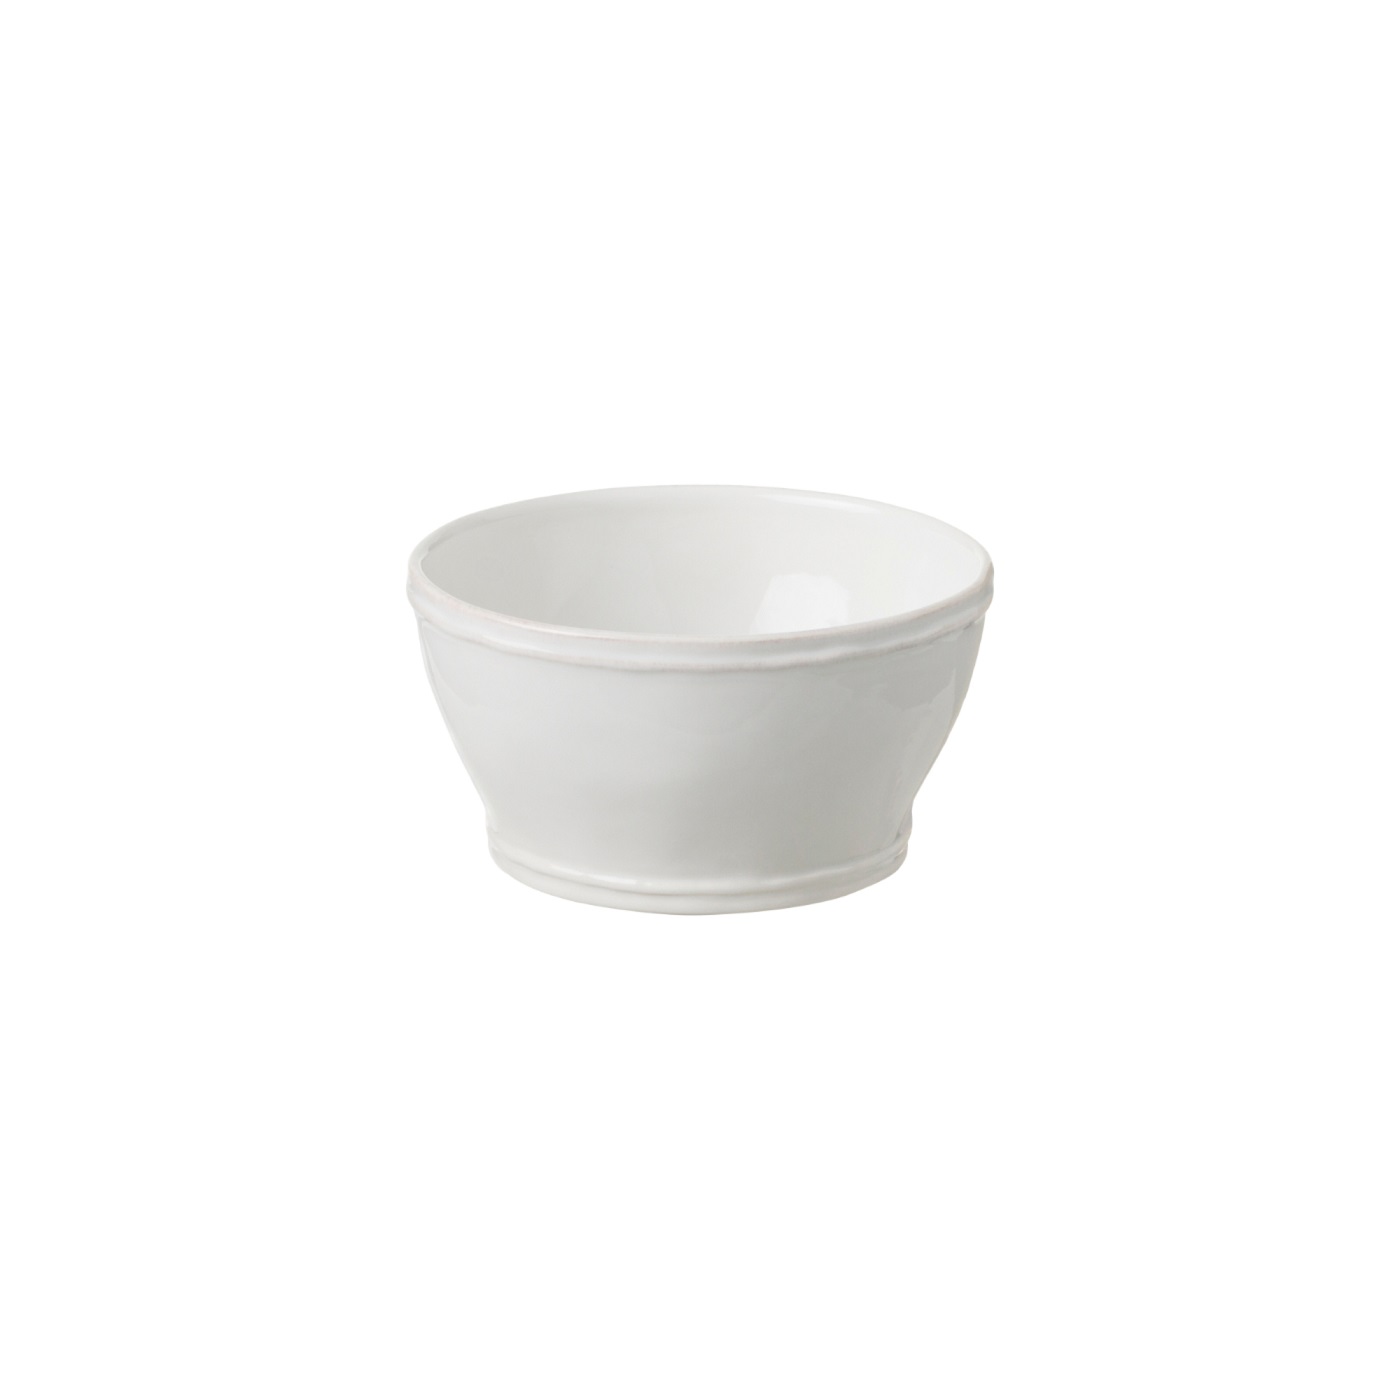 Fontana White Soup/cereal Bowl 15cm Gift